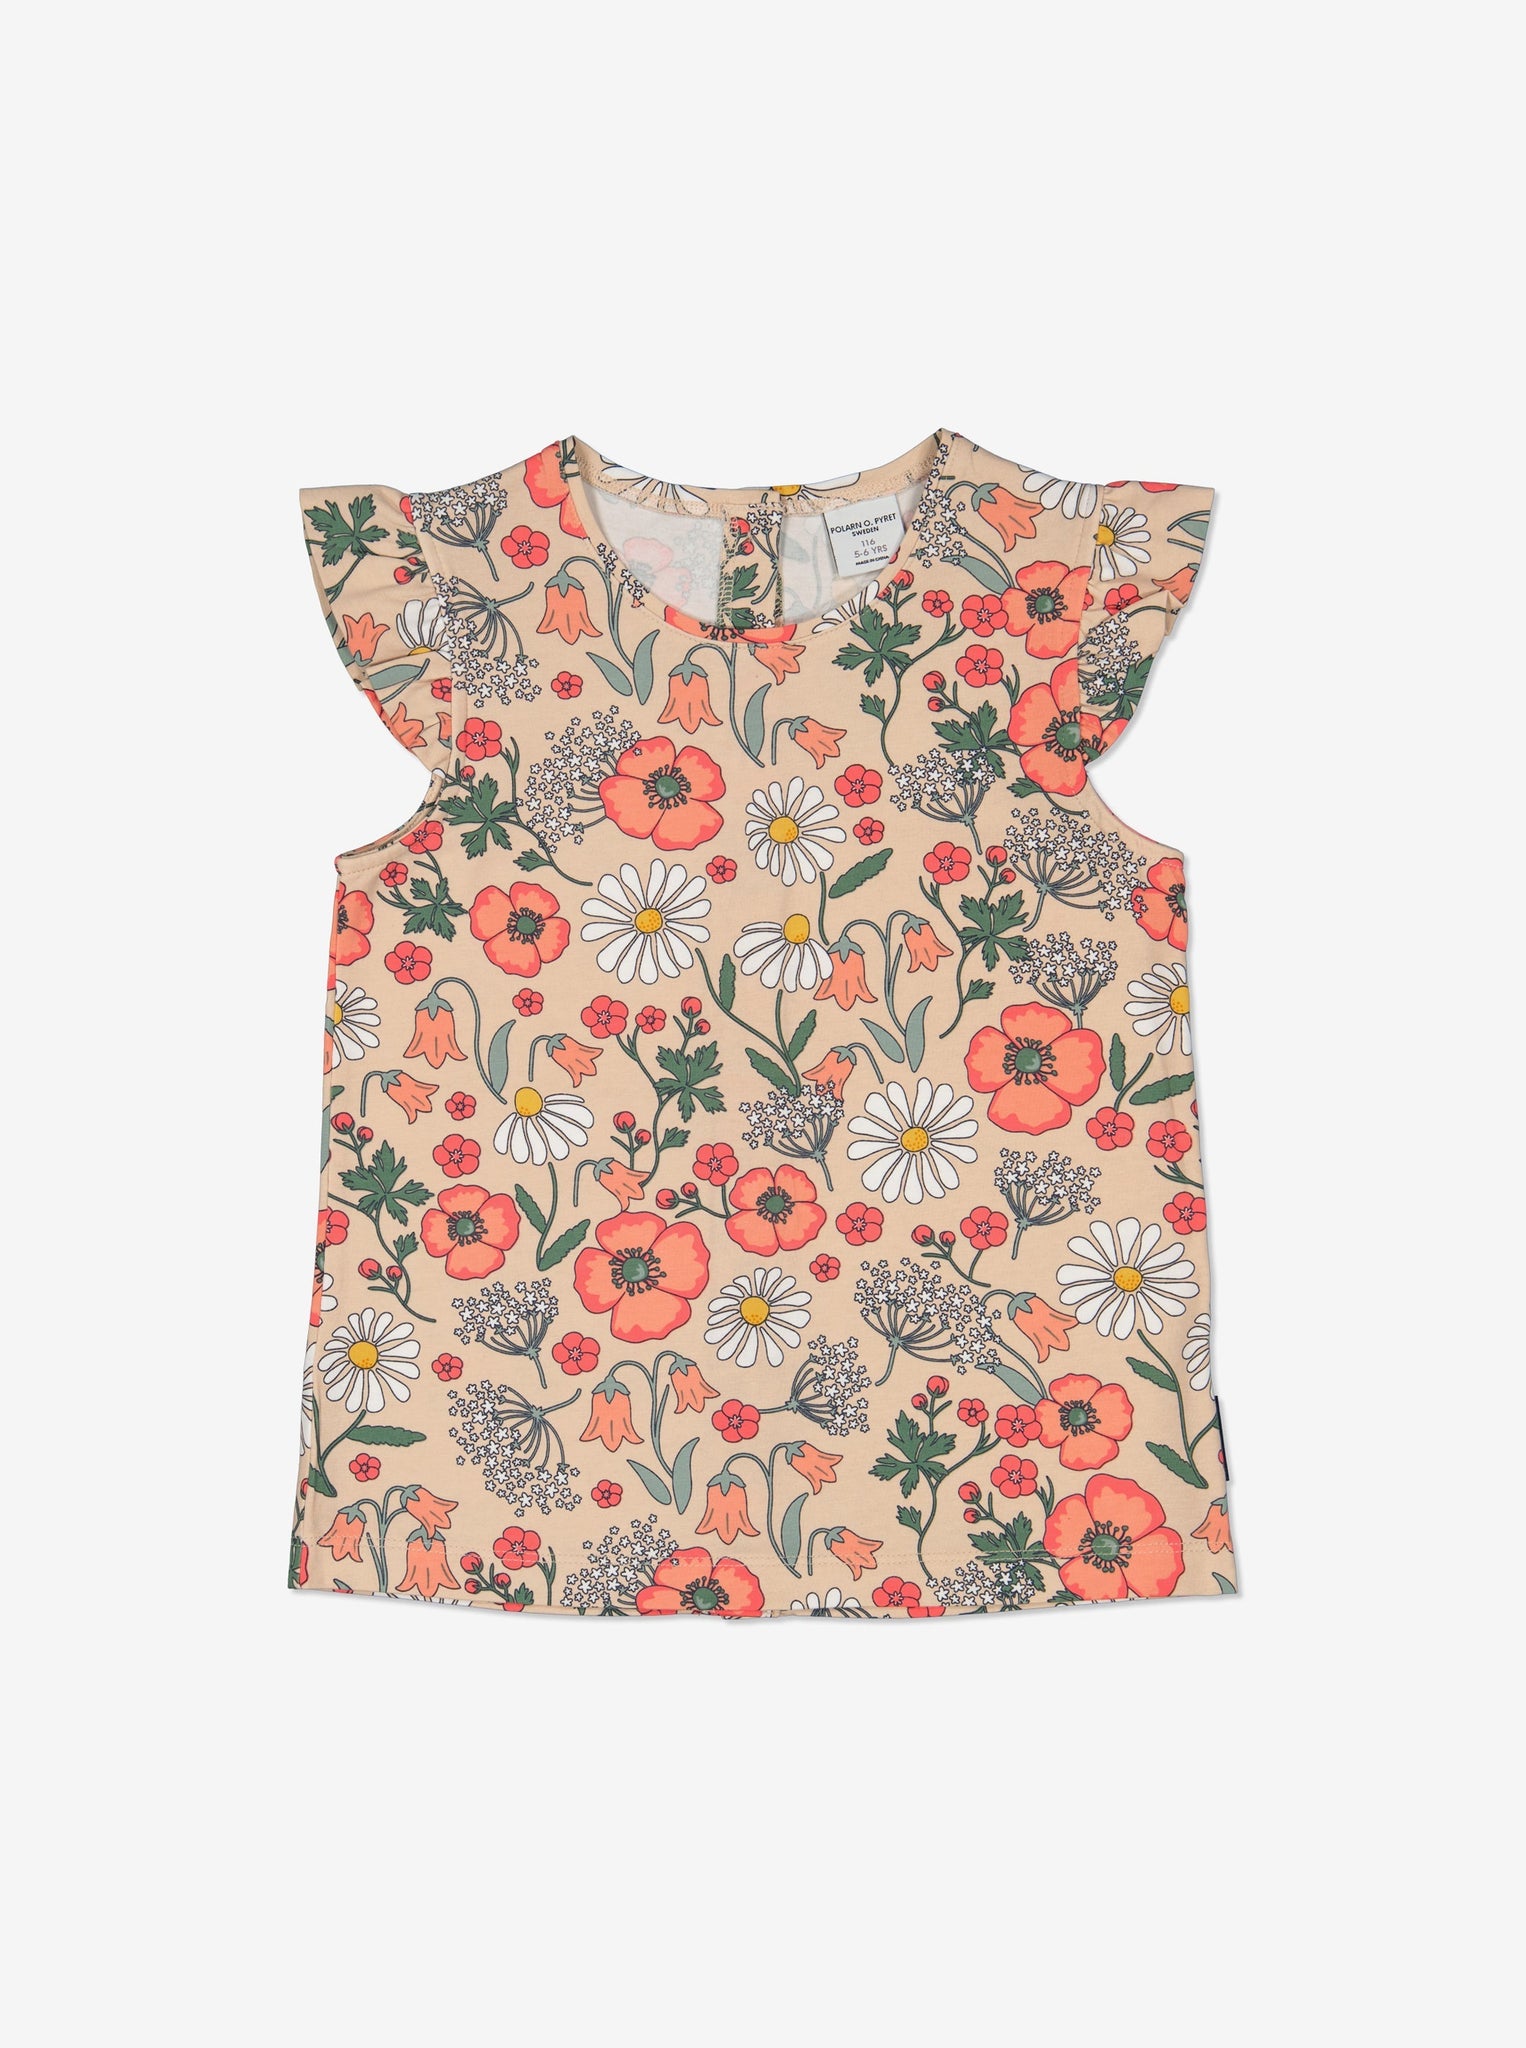 Floral Print Girls Top from Polarn O. Pyret Kidswear. Ethically made and sustainably sourced materials.